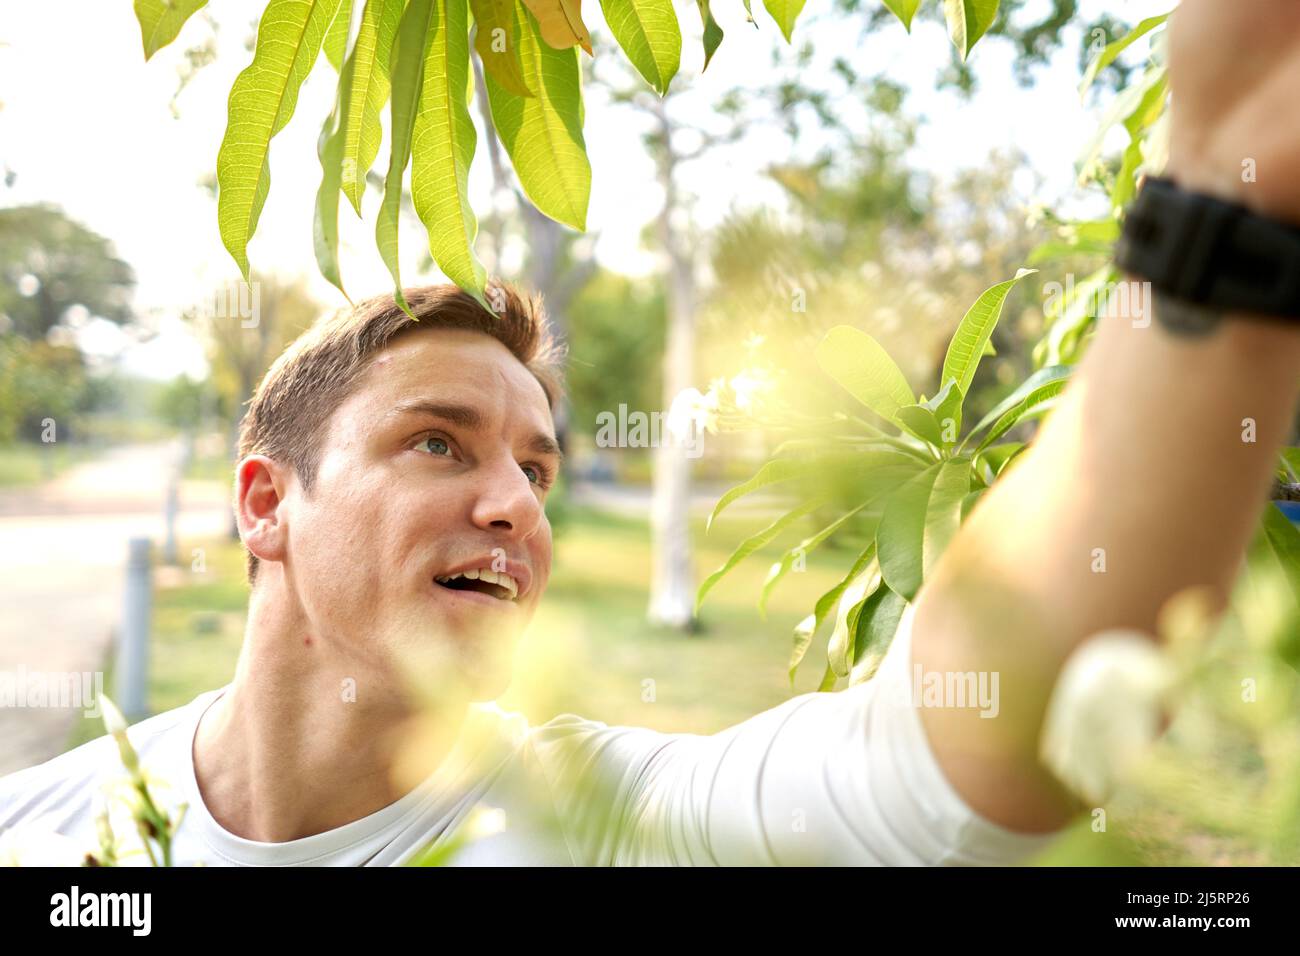 Man plucking a flower from a tree in the park Stock Photo